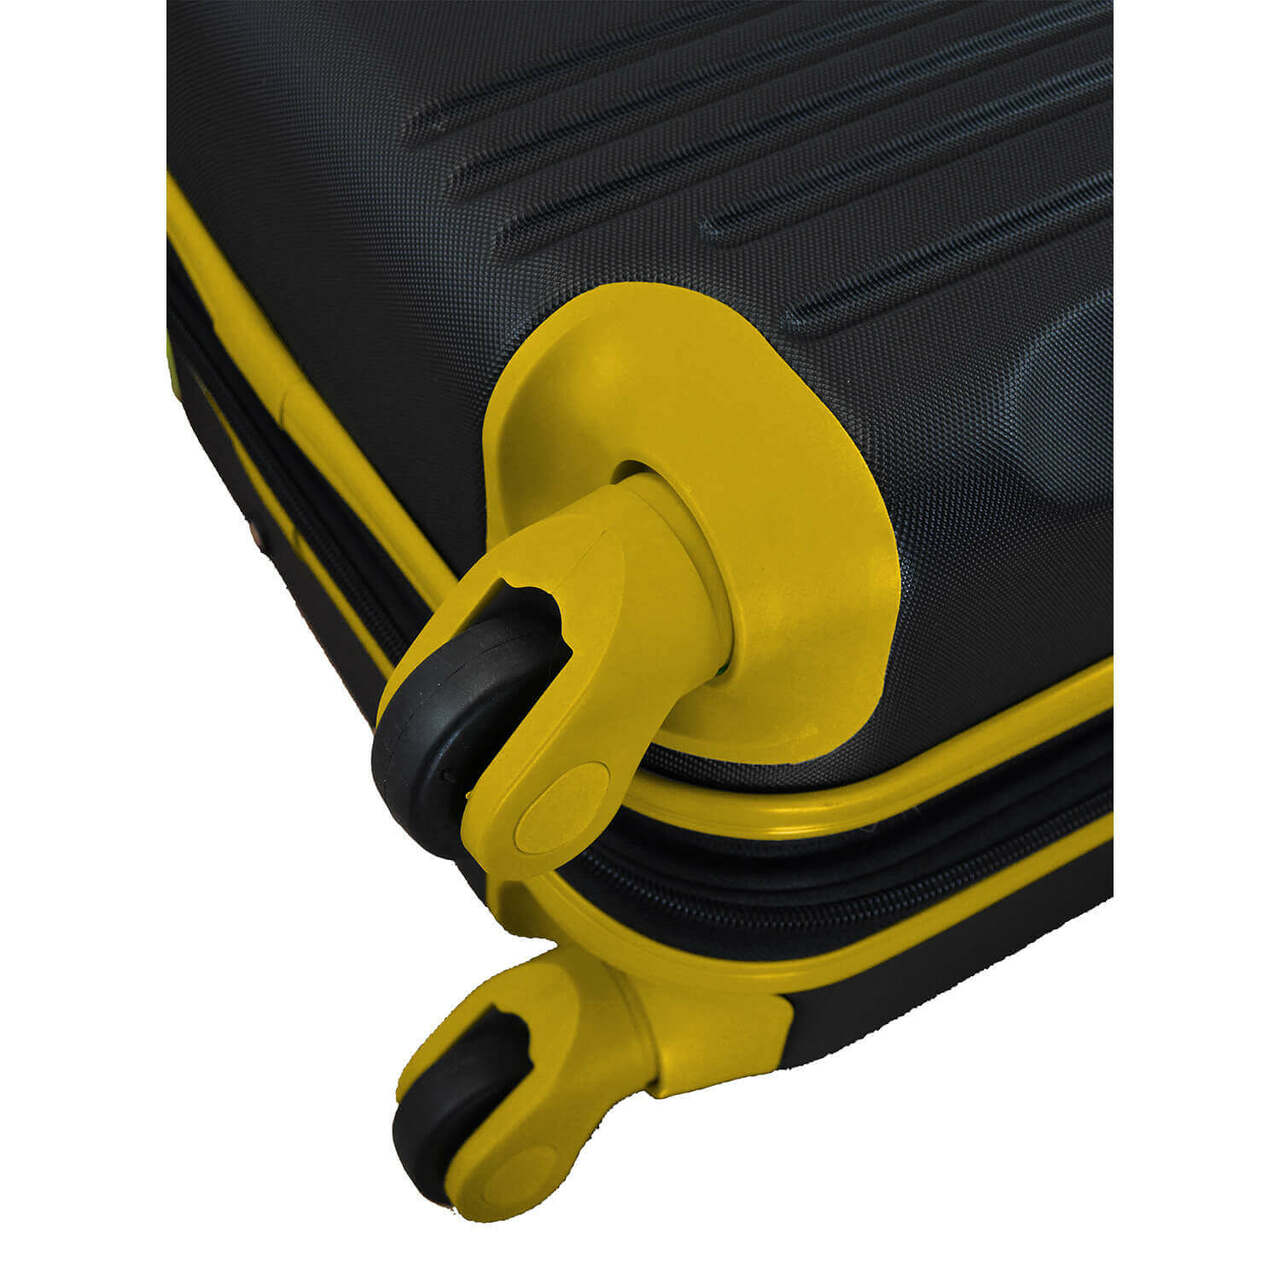 Wyoming arry On Spinner Luggage | Wyoming Hardcase Two-Tone Luggage Carry-on Spinner in Yellow